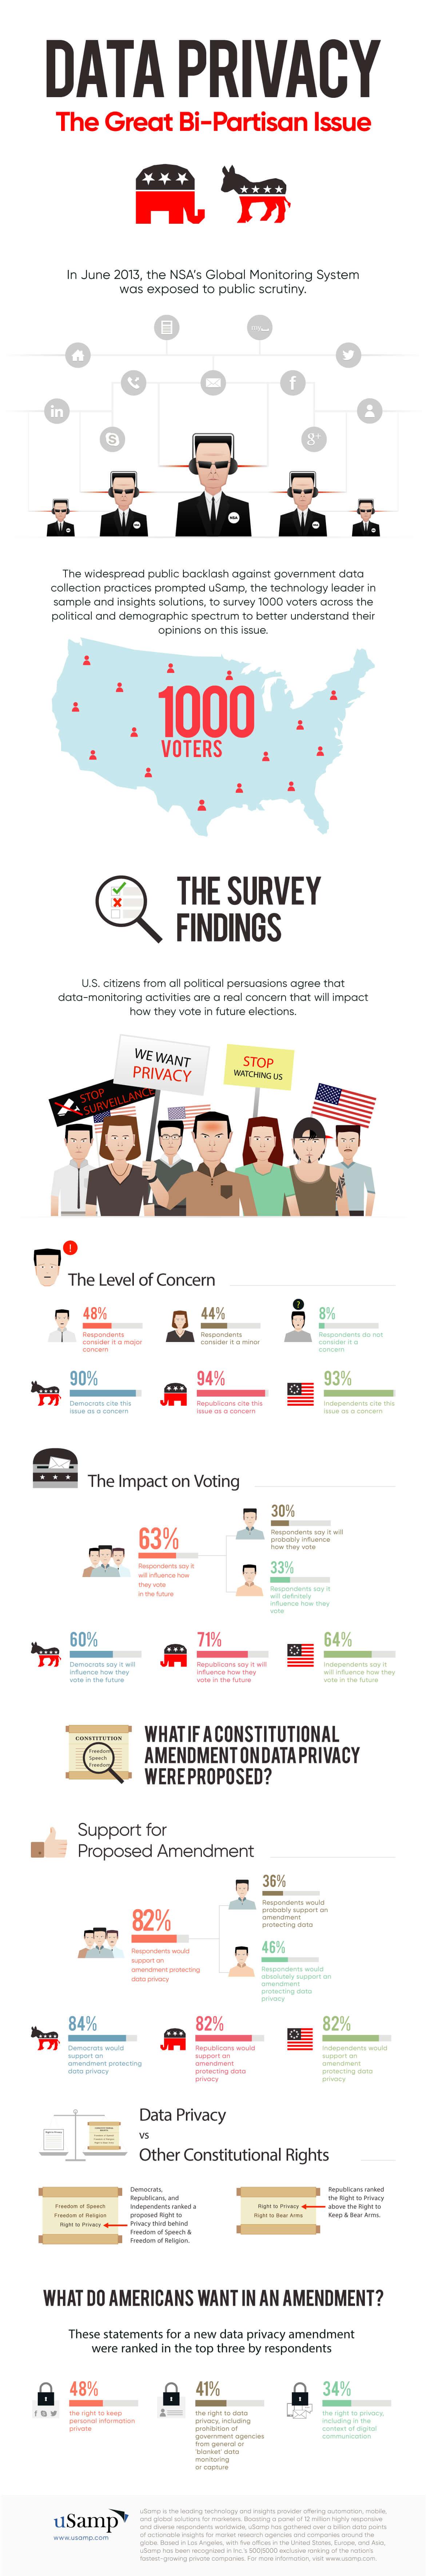 Data-Privacy-The-Great-Bi-Partisan-Issue-Infographic copy